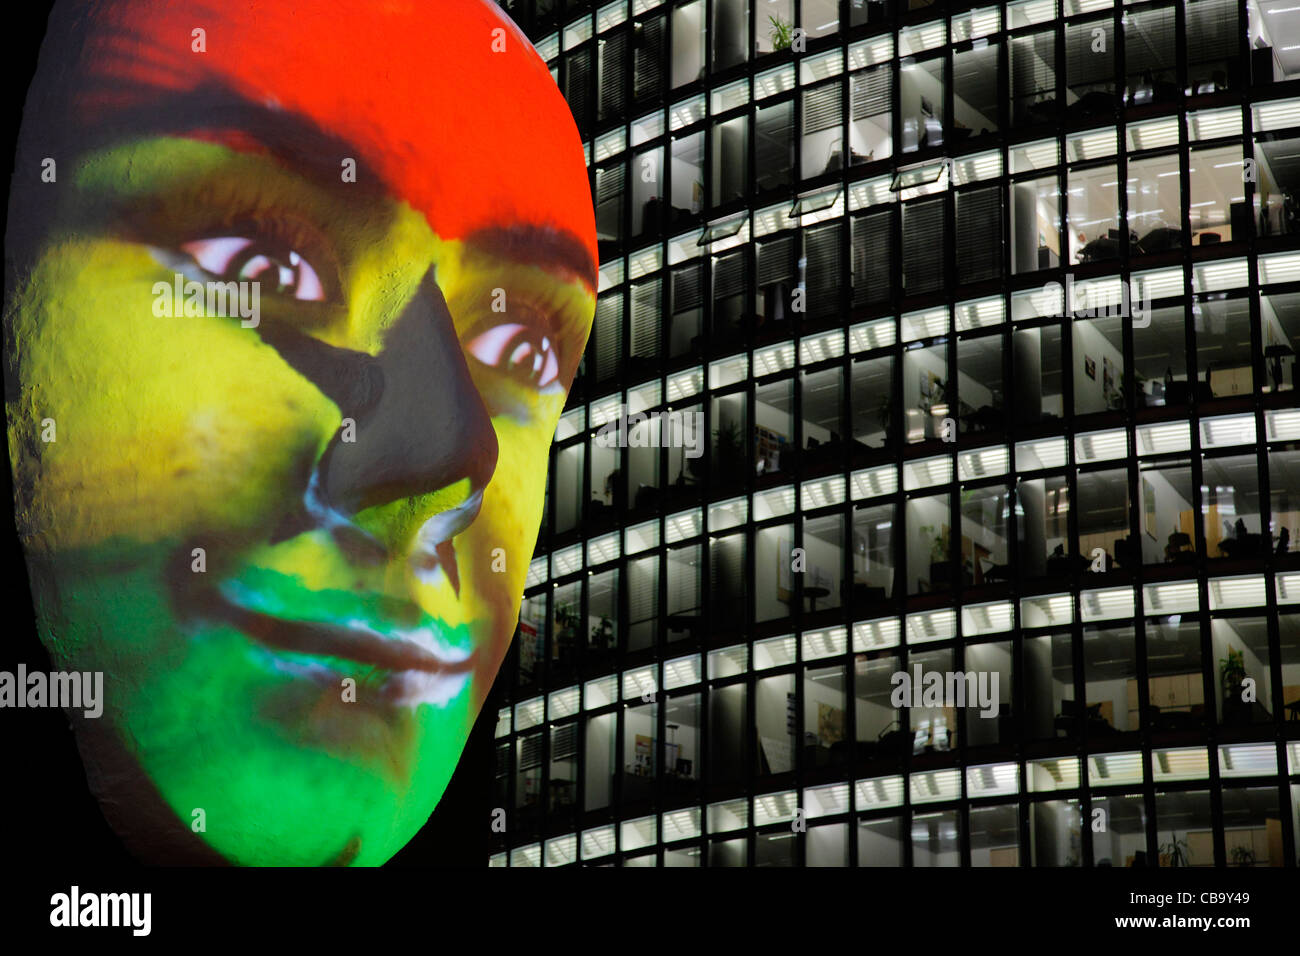 Huge sculpture of a face illuminated by an image of a Ghanaian flag painted face during the festival of lights 2011 in Berlin Stock Photo